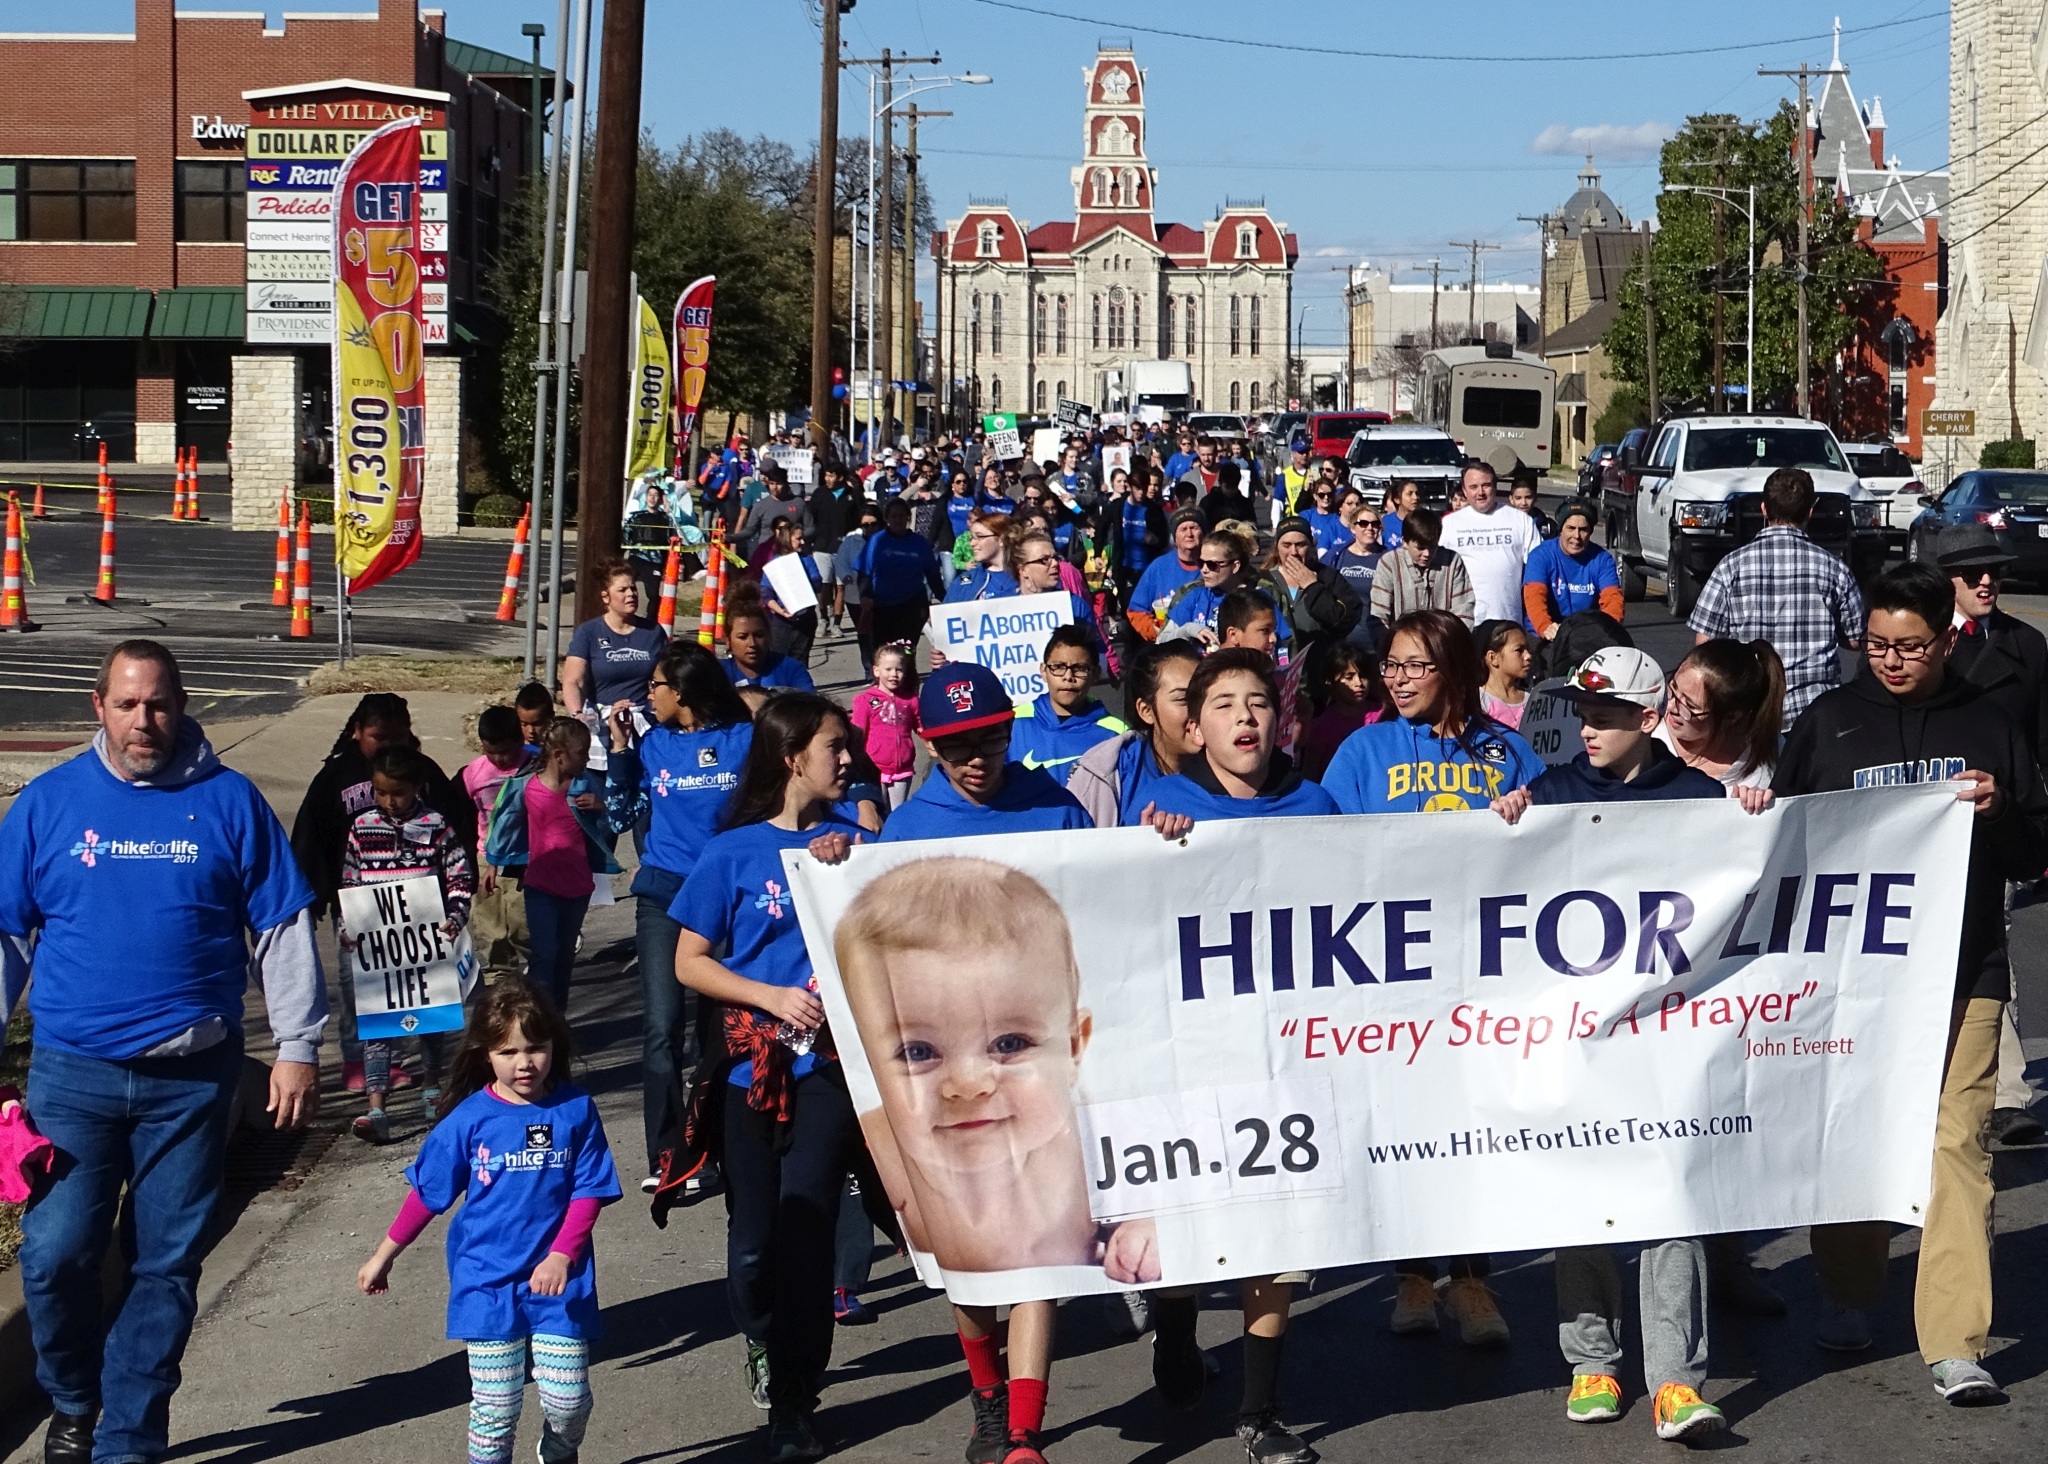 Hike for Life